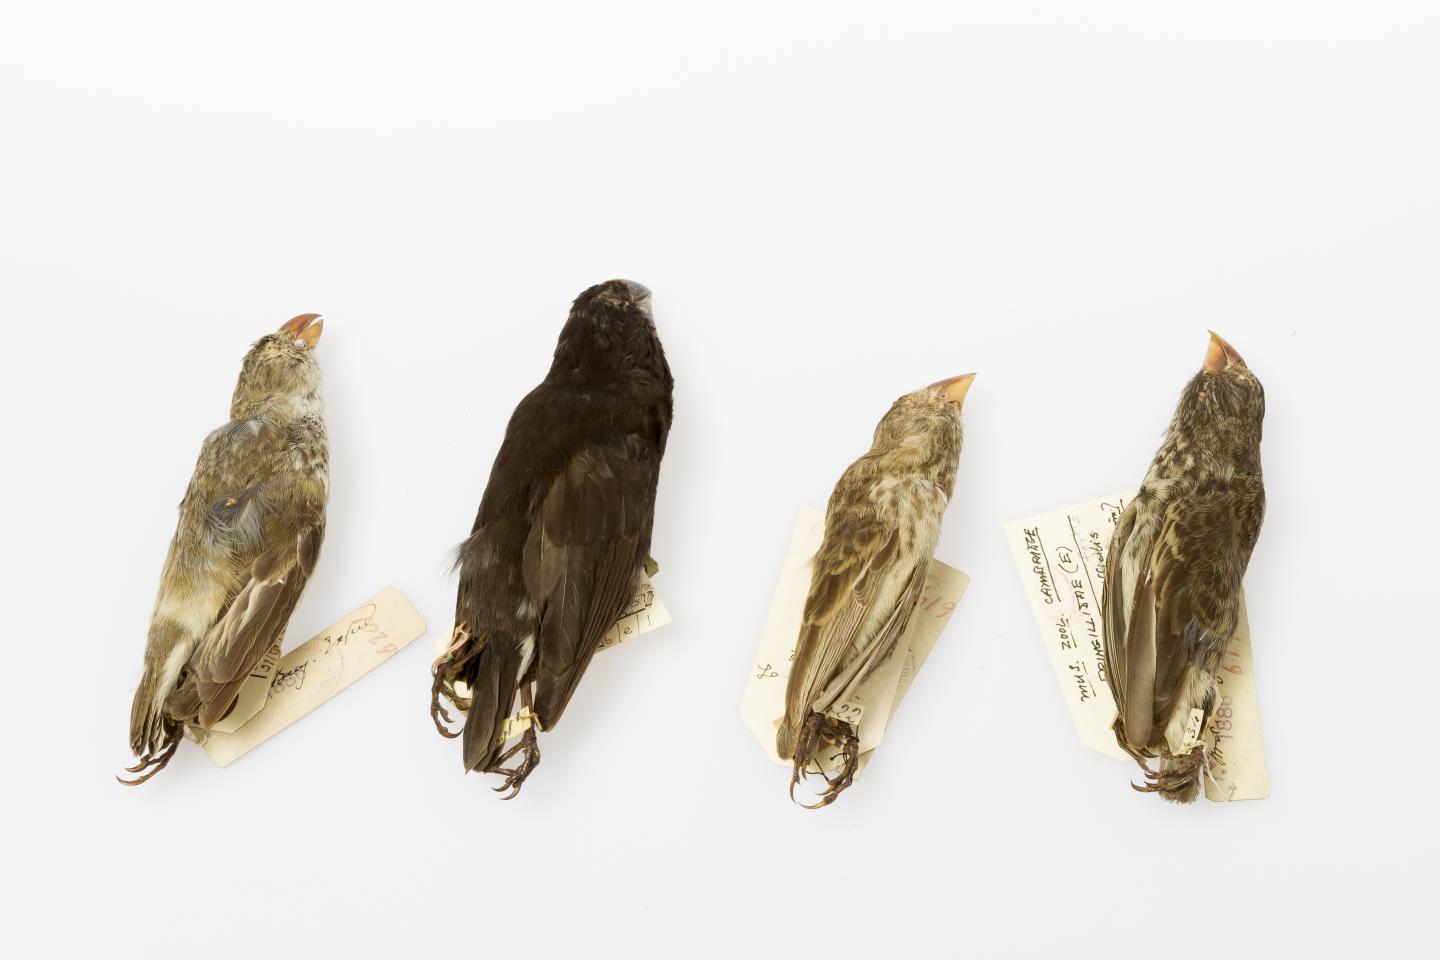 Galapagos Finch Specimens from the HMS Beagle's Second Voyage